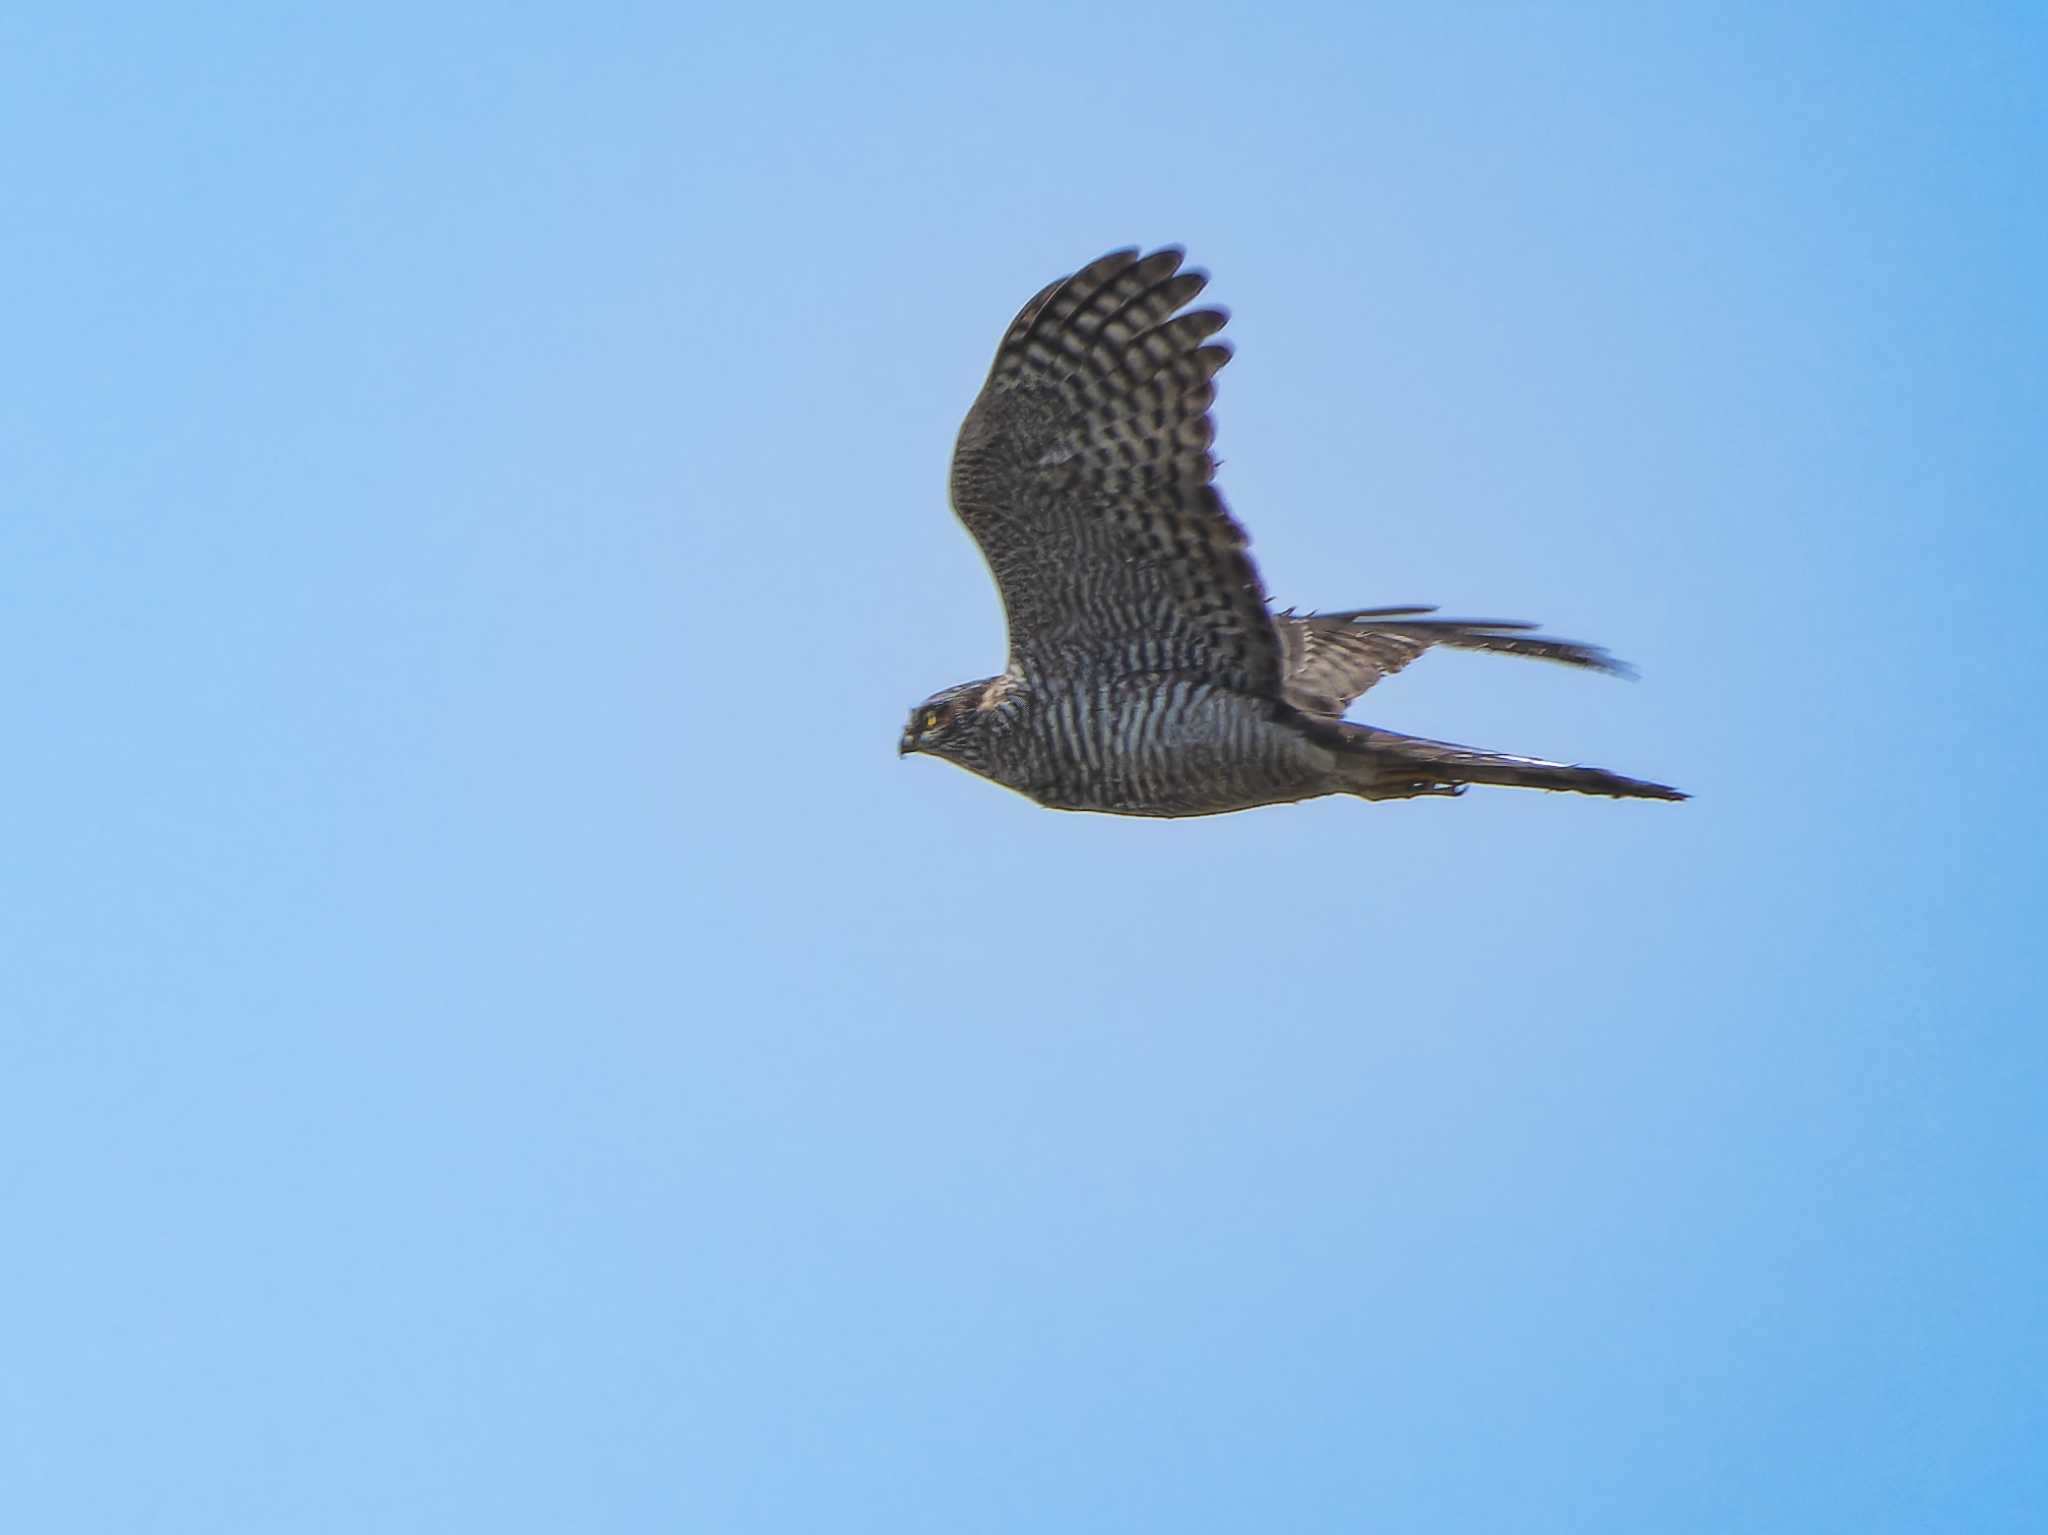 Photo of Eurasian Sparrowhawk at 長崎県 by ここは長崎